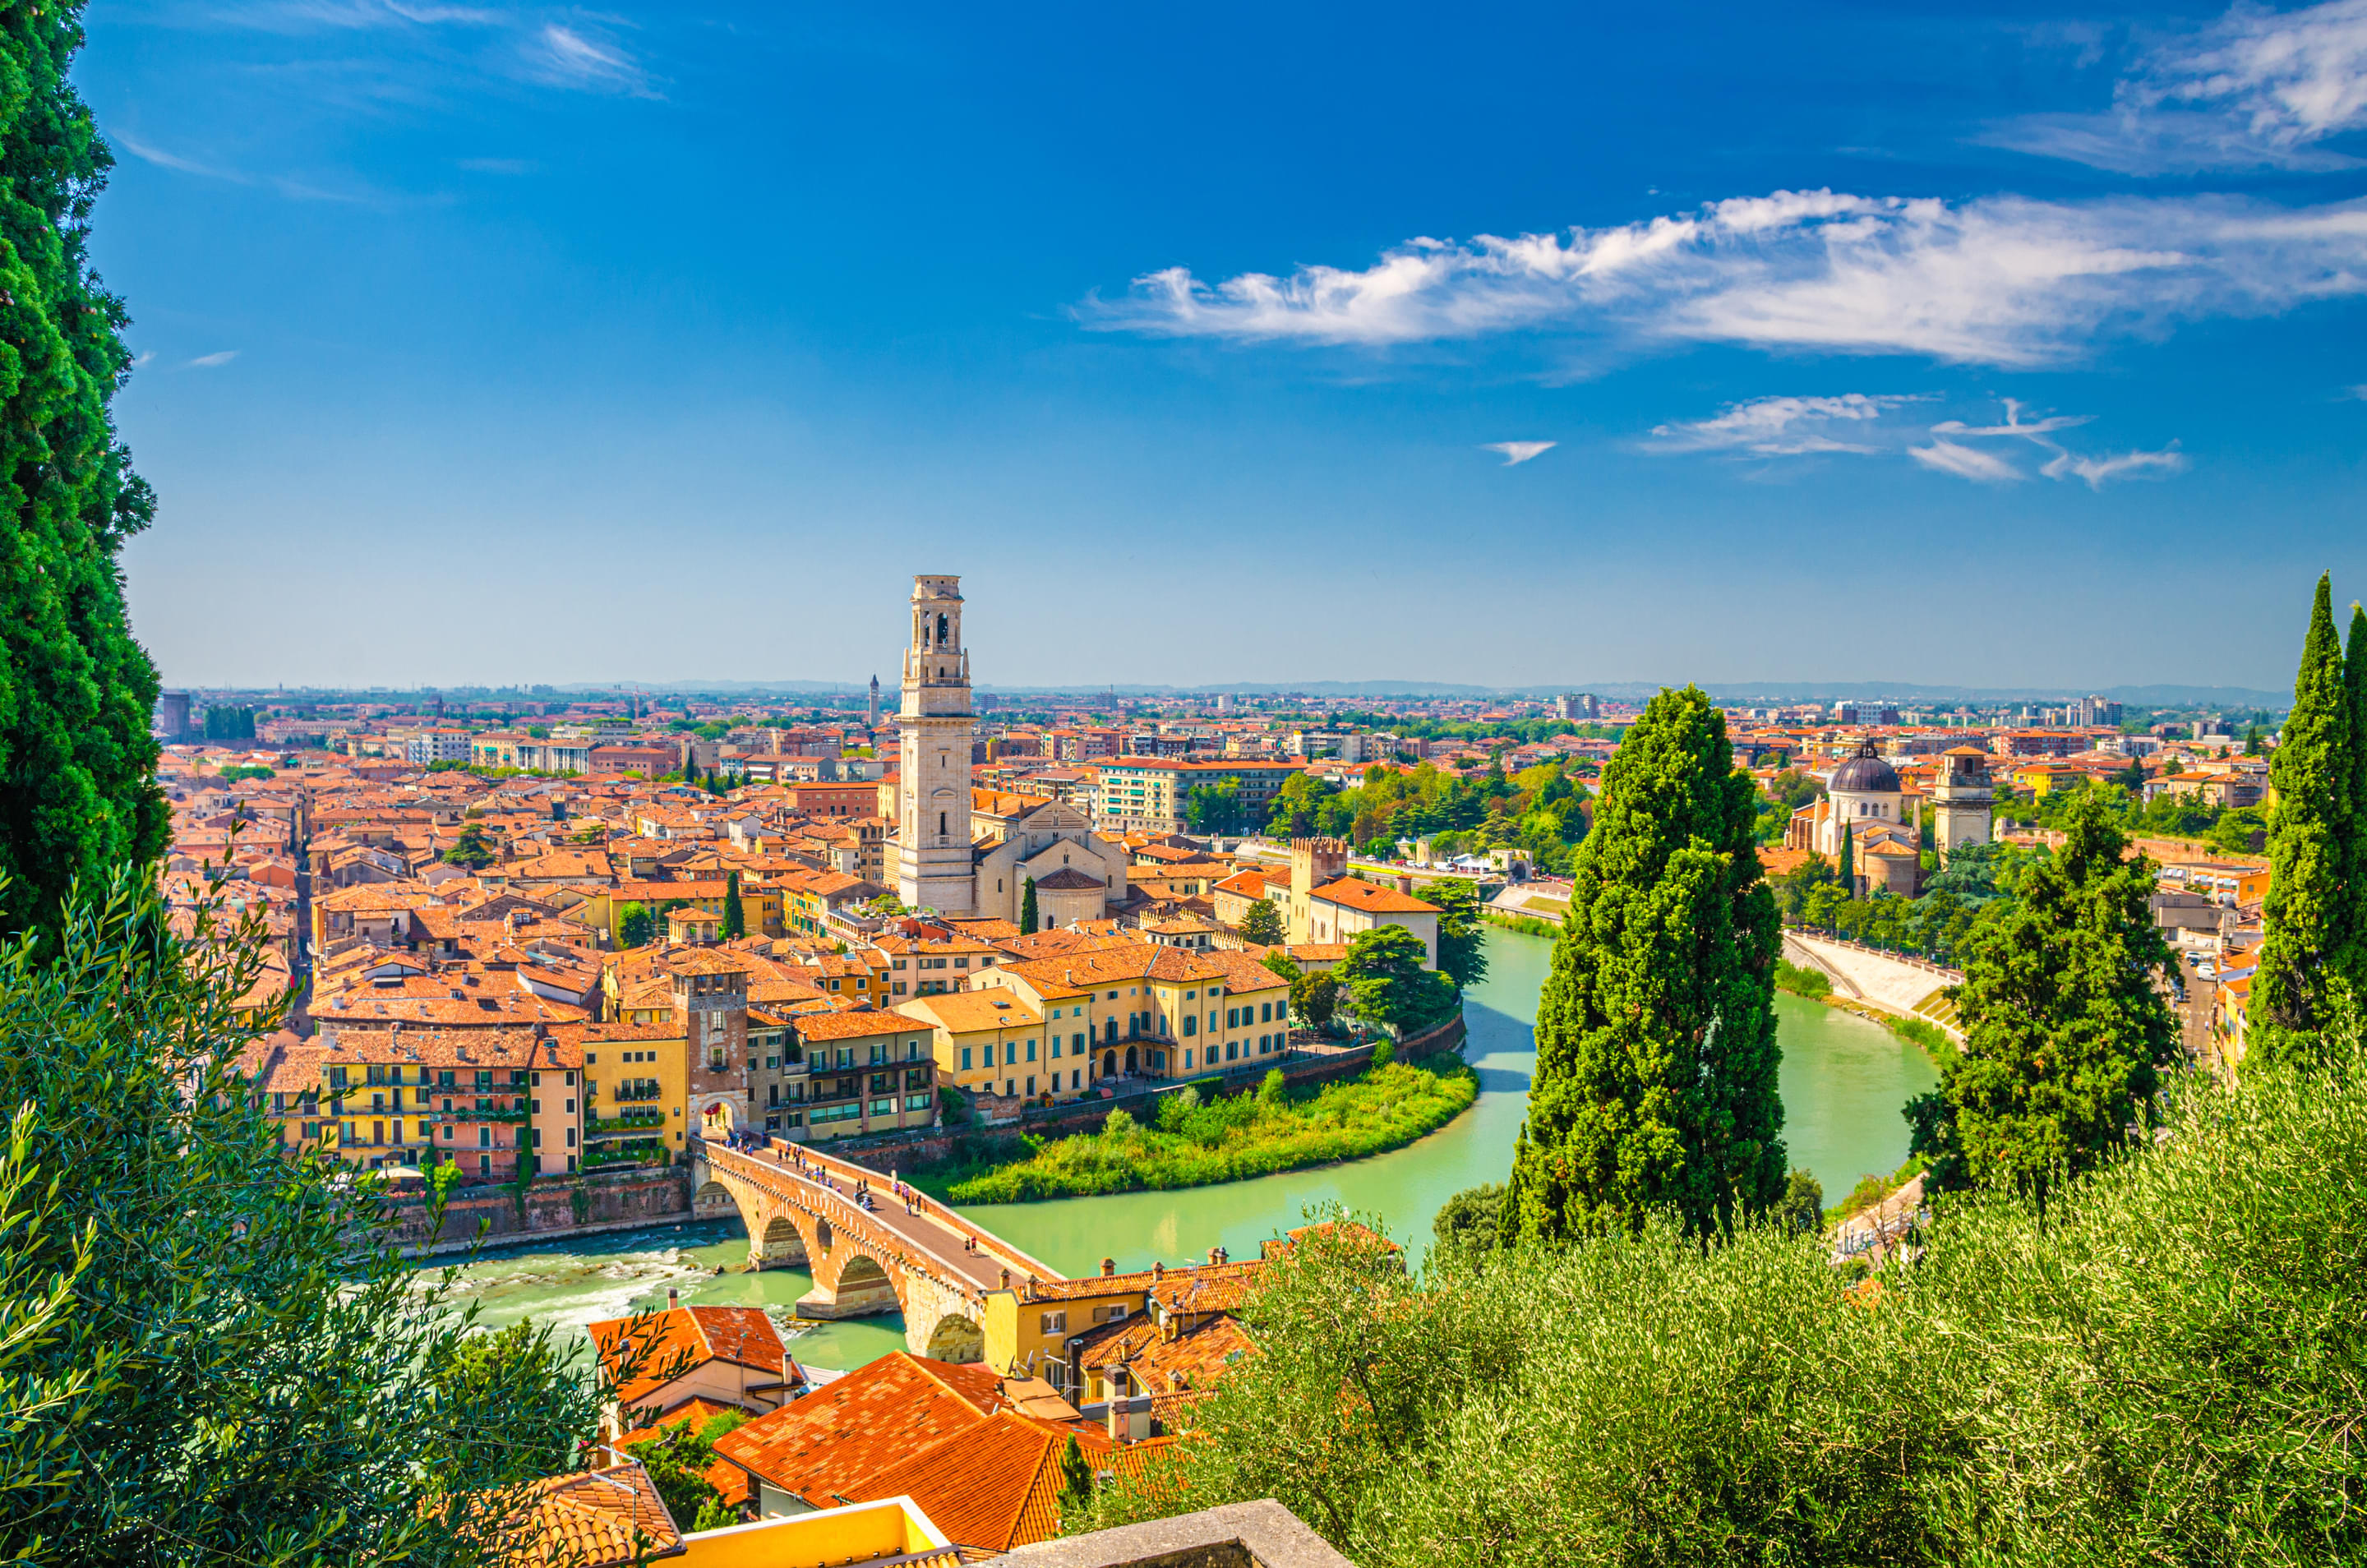 Things to Do in Verona